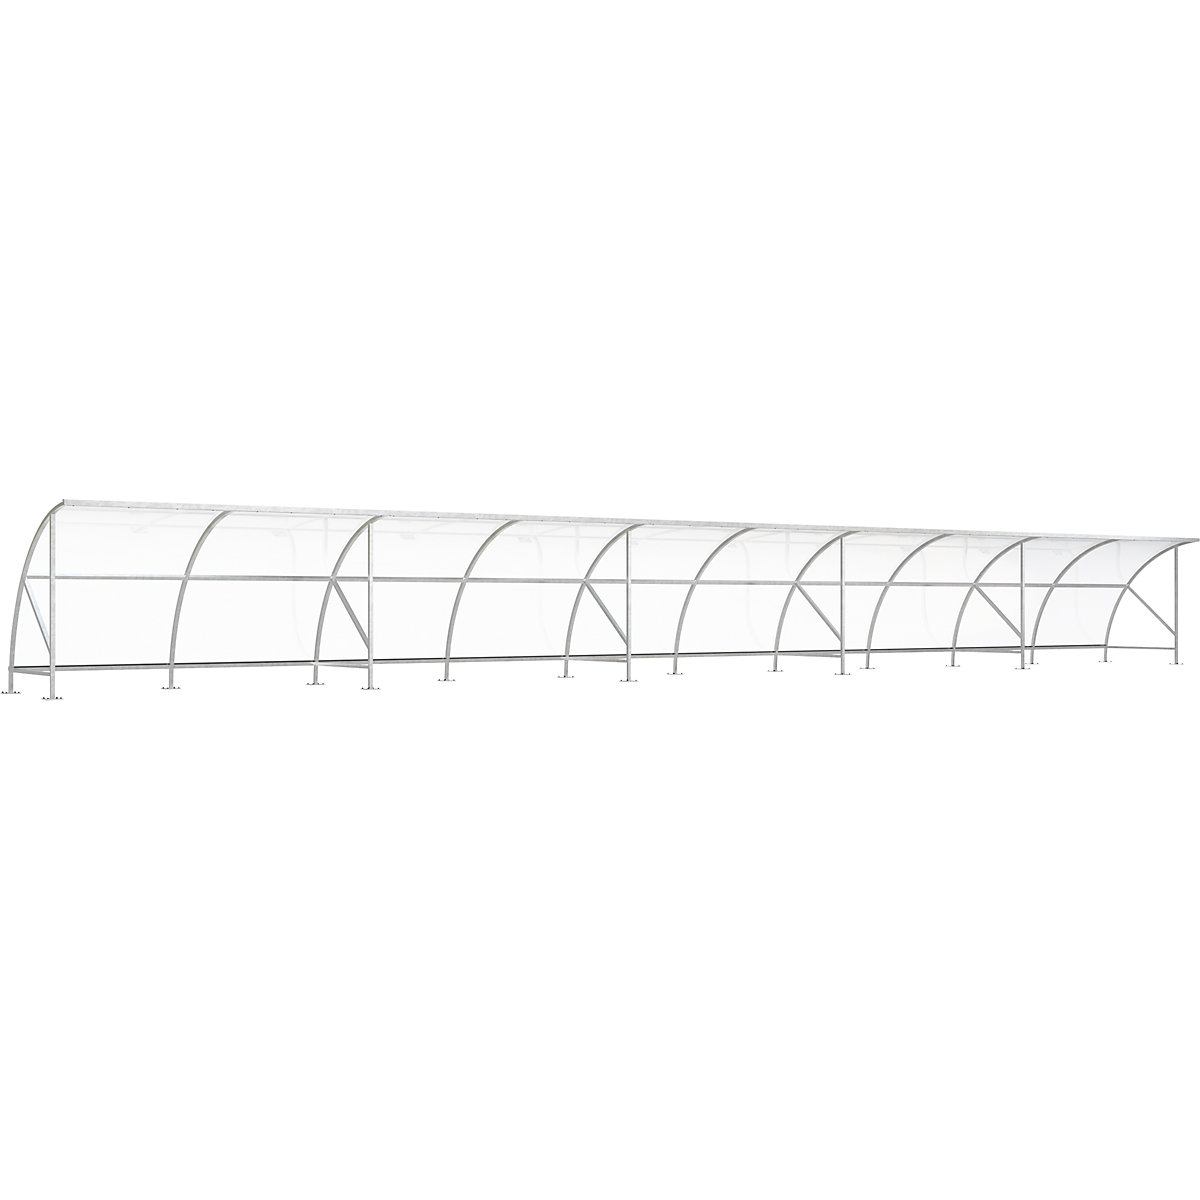 Bicycle shelter, made of polycarbonate, WxD 20550 x 2100 mm, silver-8